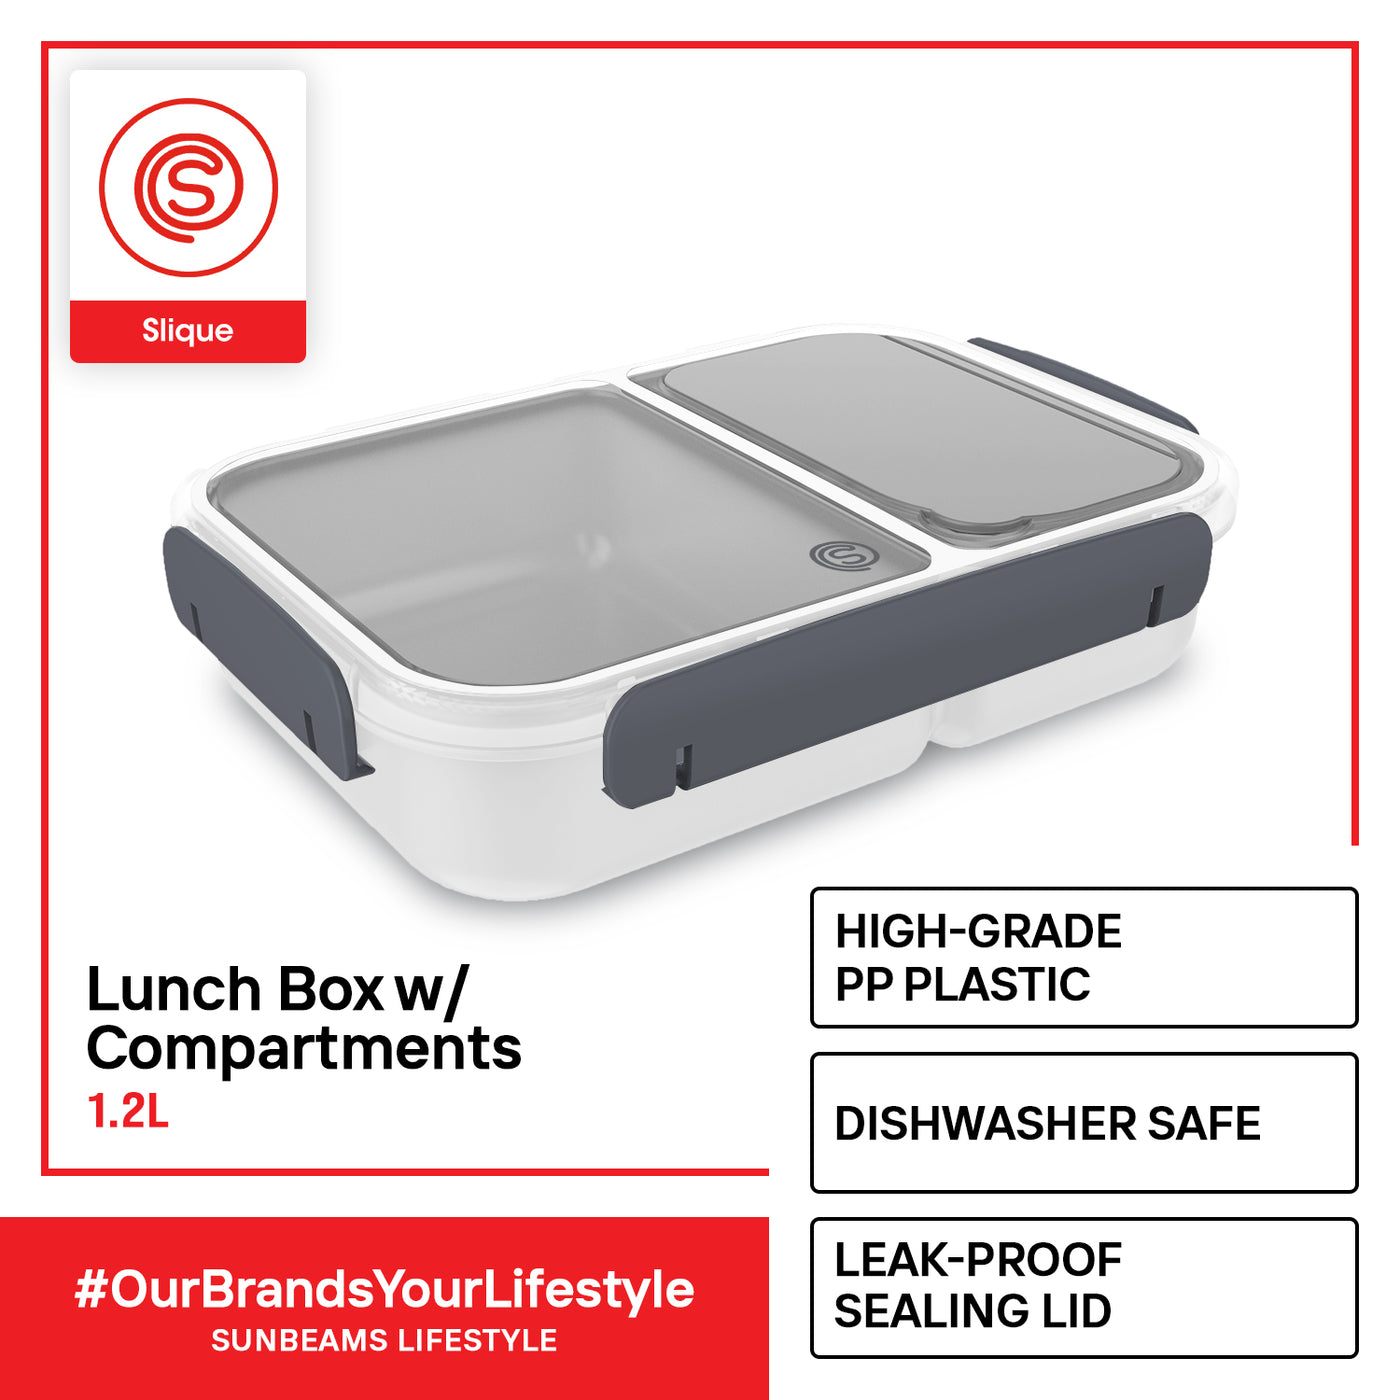 SLIQUE Premium Lunch Box w/ Compartments 1200ml|1.2L BPA Free Airtight Microwave Safe Amazing Gift Idea For Any Occasion! (White)